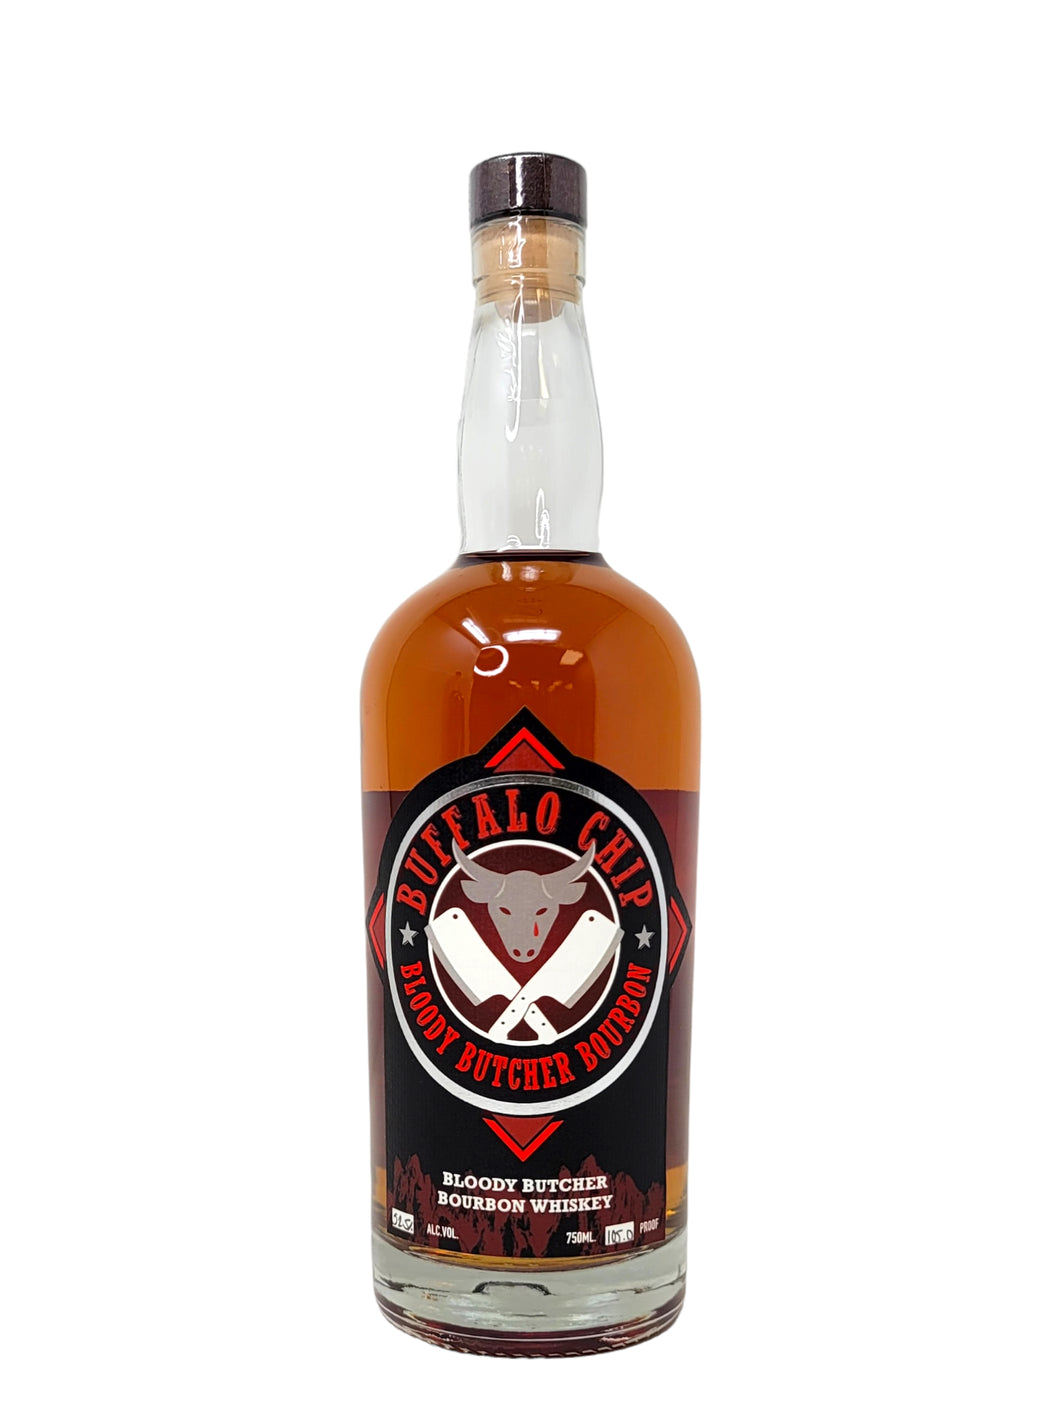 Buffalo Chip Bloody Butcher Bourbon Barrel 105 proof - Selected by Seelbach's